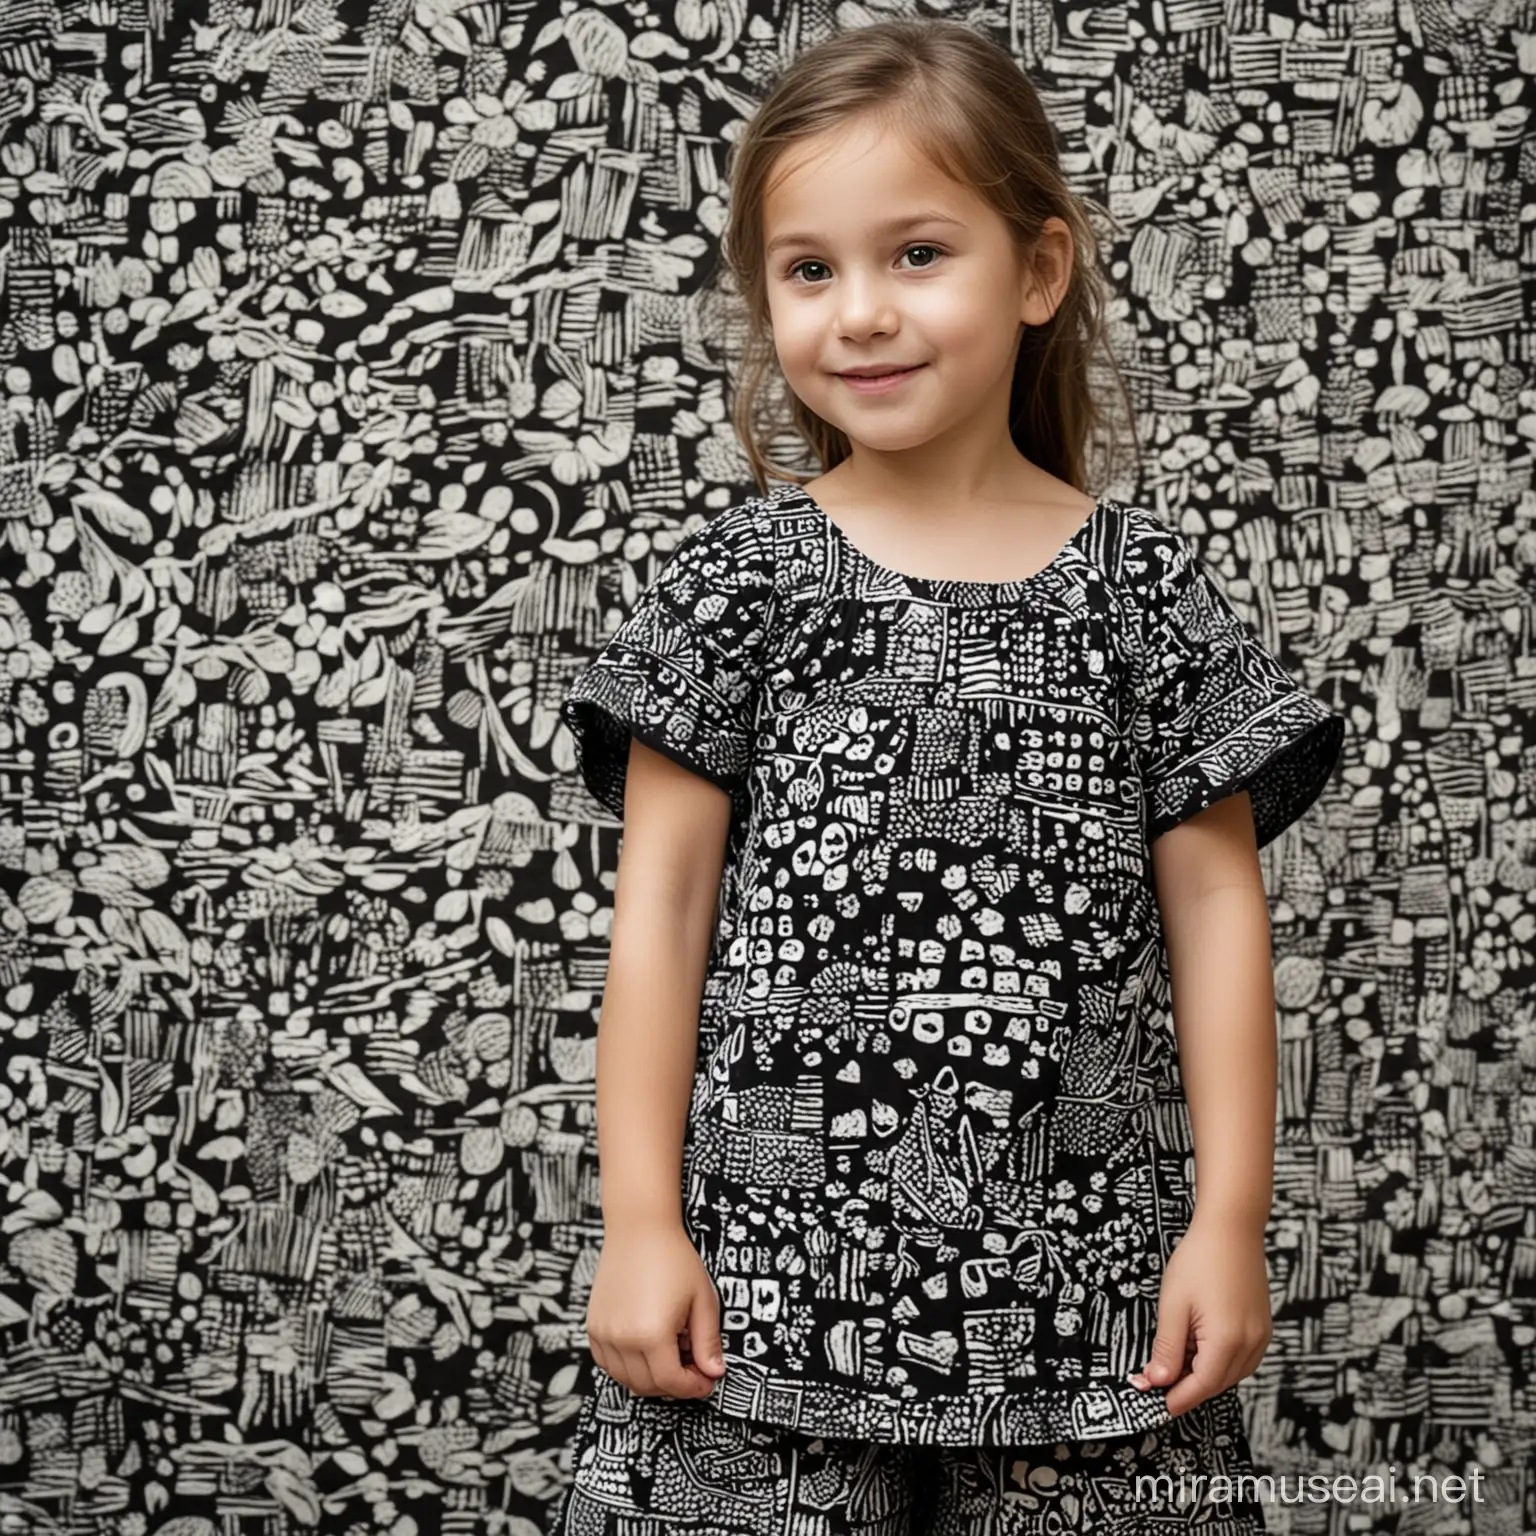 Young Girl in Black and White Batik Dress